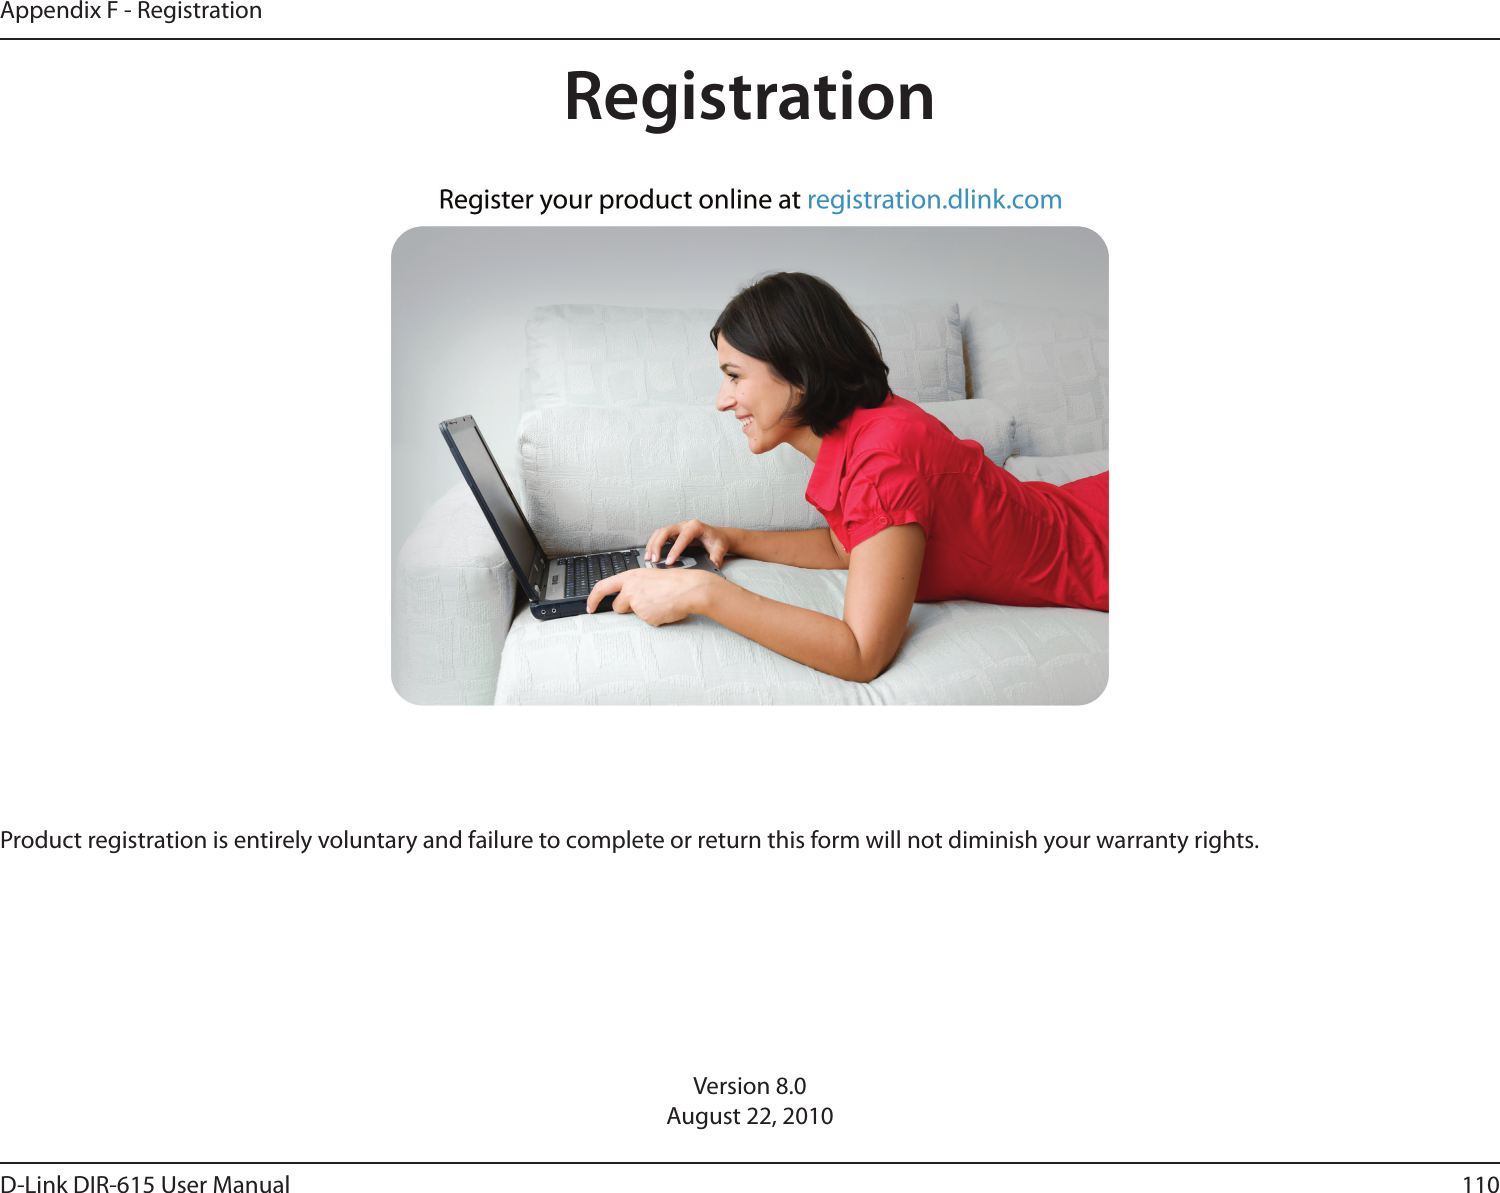 110D-Link DIR-615 User ManualAppendix F - RegistrationVersion 8.0August 22, 2010Product registration is entirely voluntary and failure to complete or return this form will not diminish your warranty rights.Registration